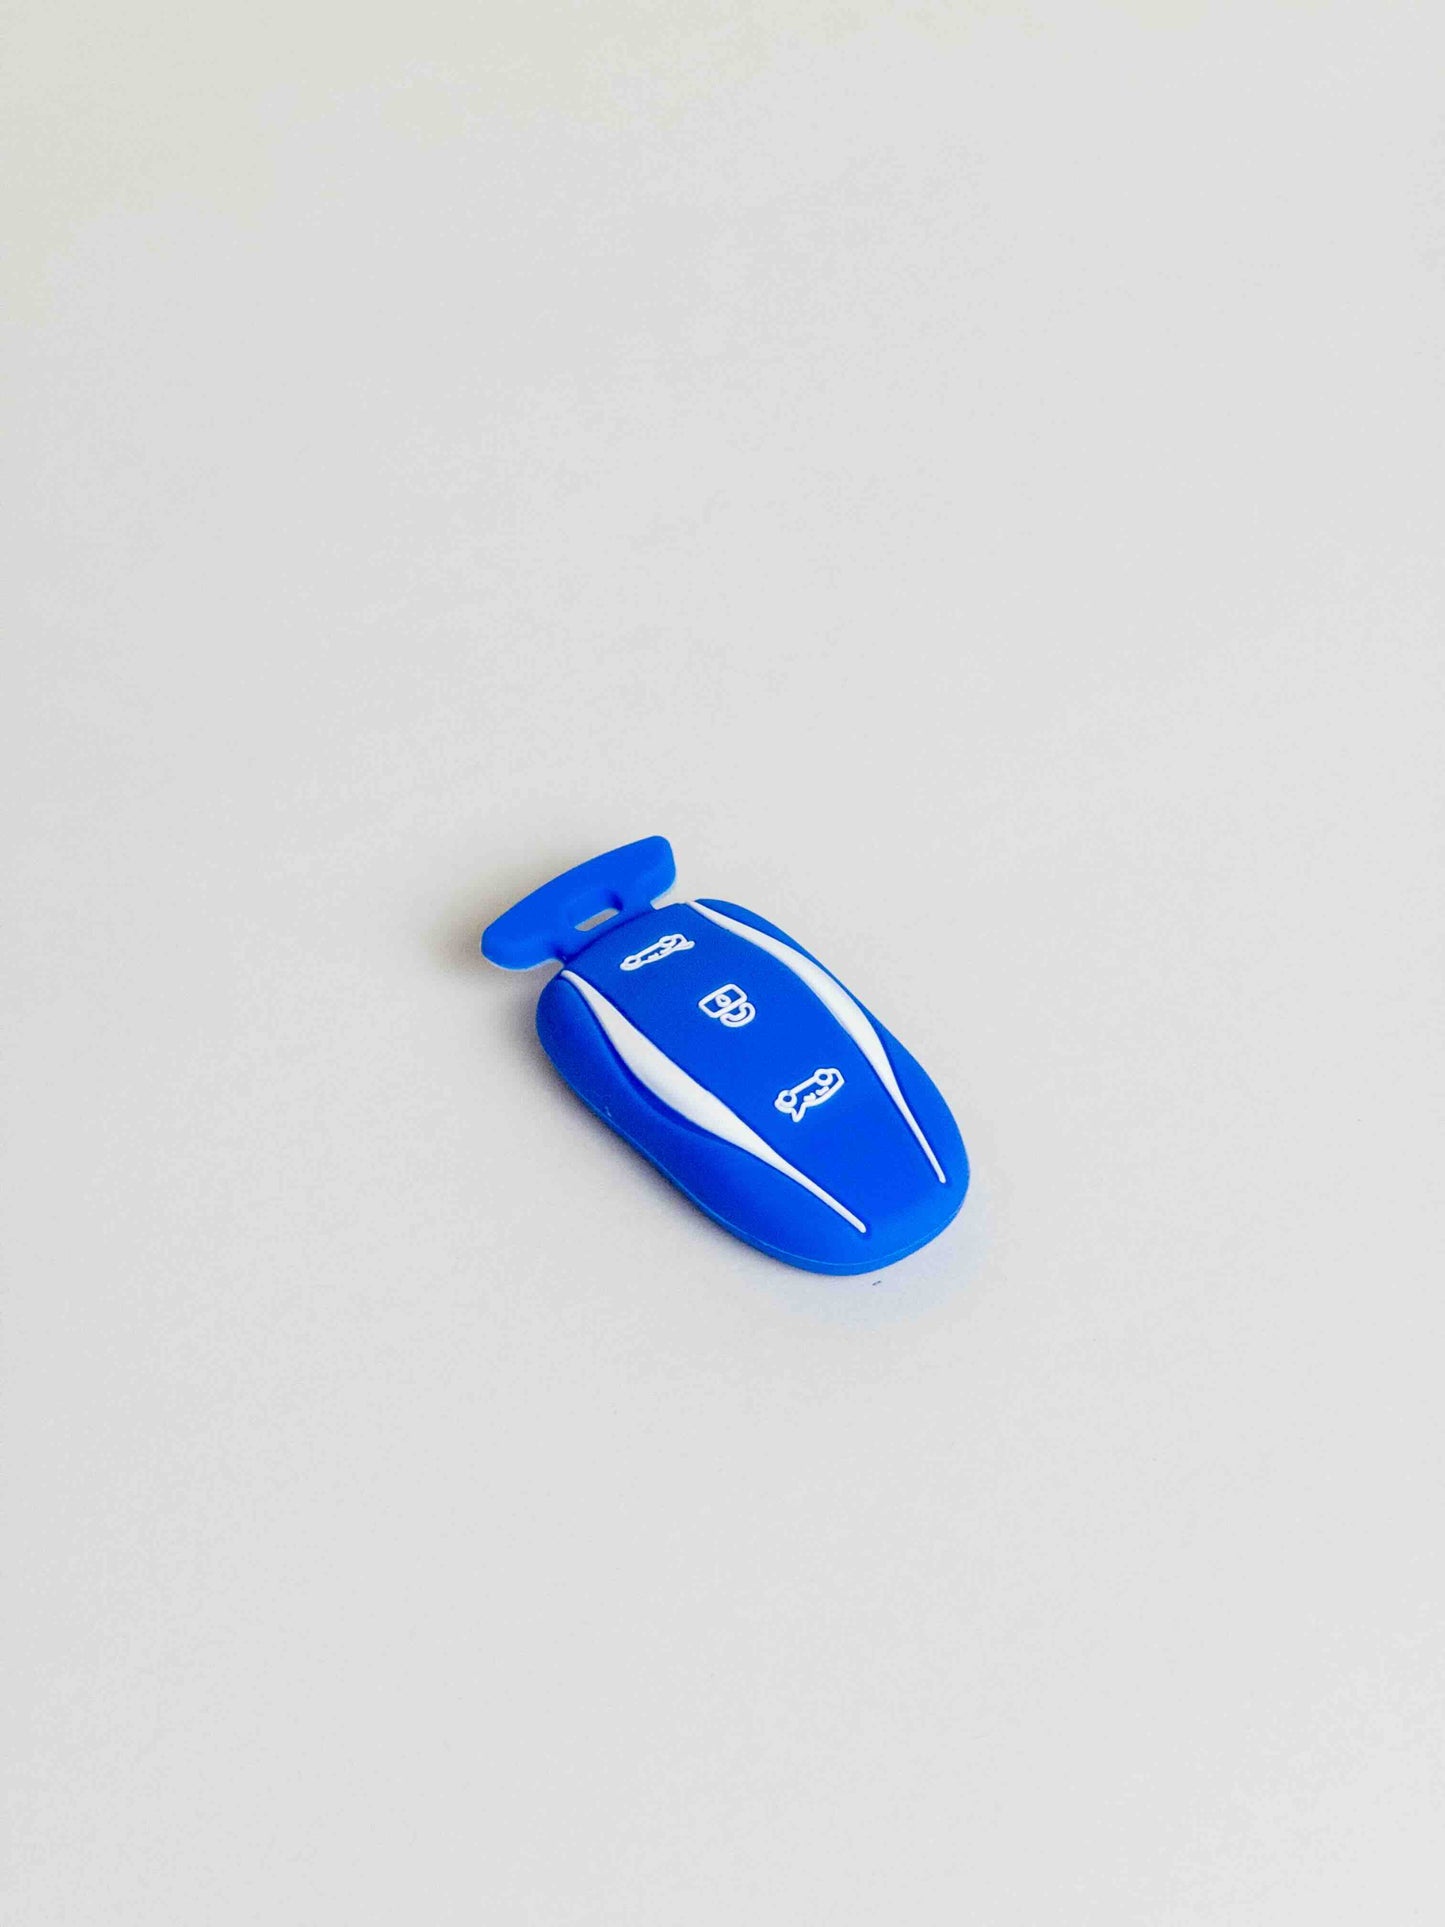 Model S keyfob protection in many colors